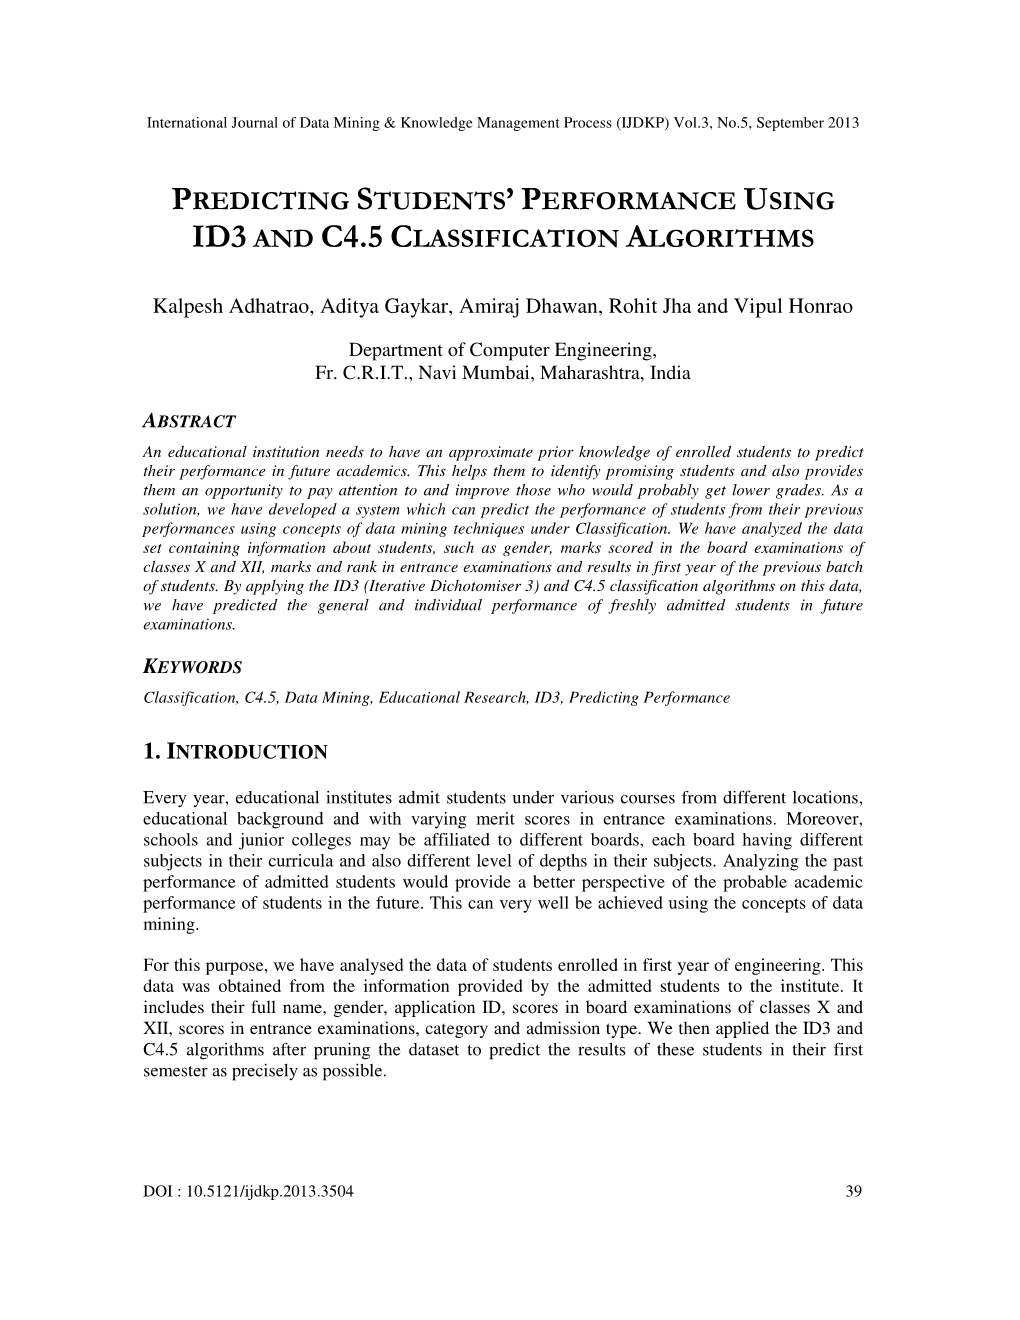 Predicting Students' Performance Using ID3 and C4.5 Classification